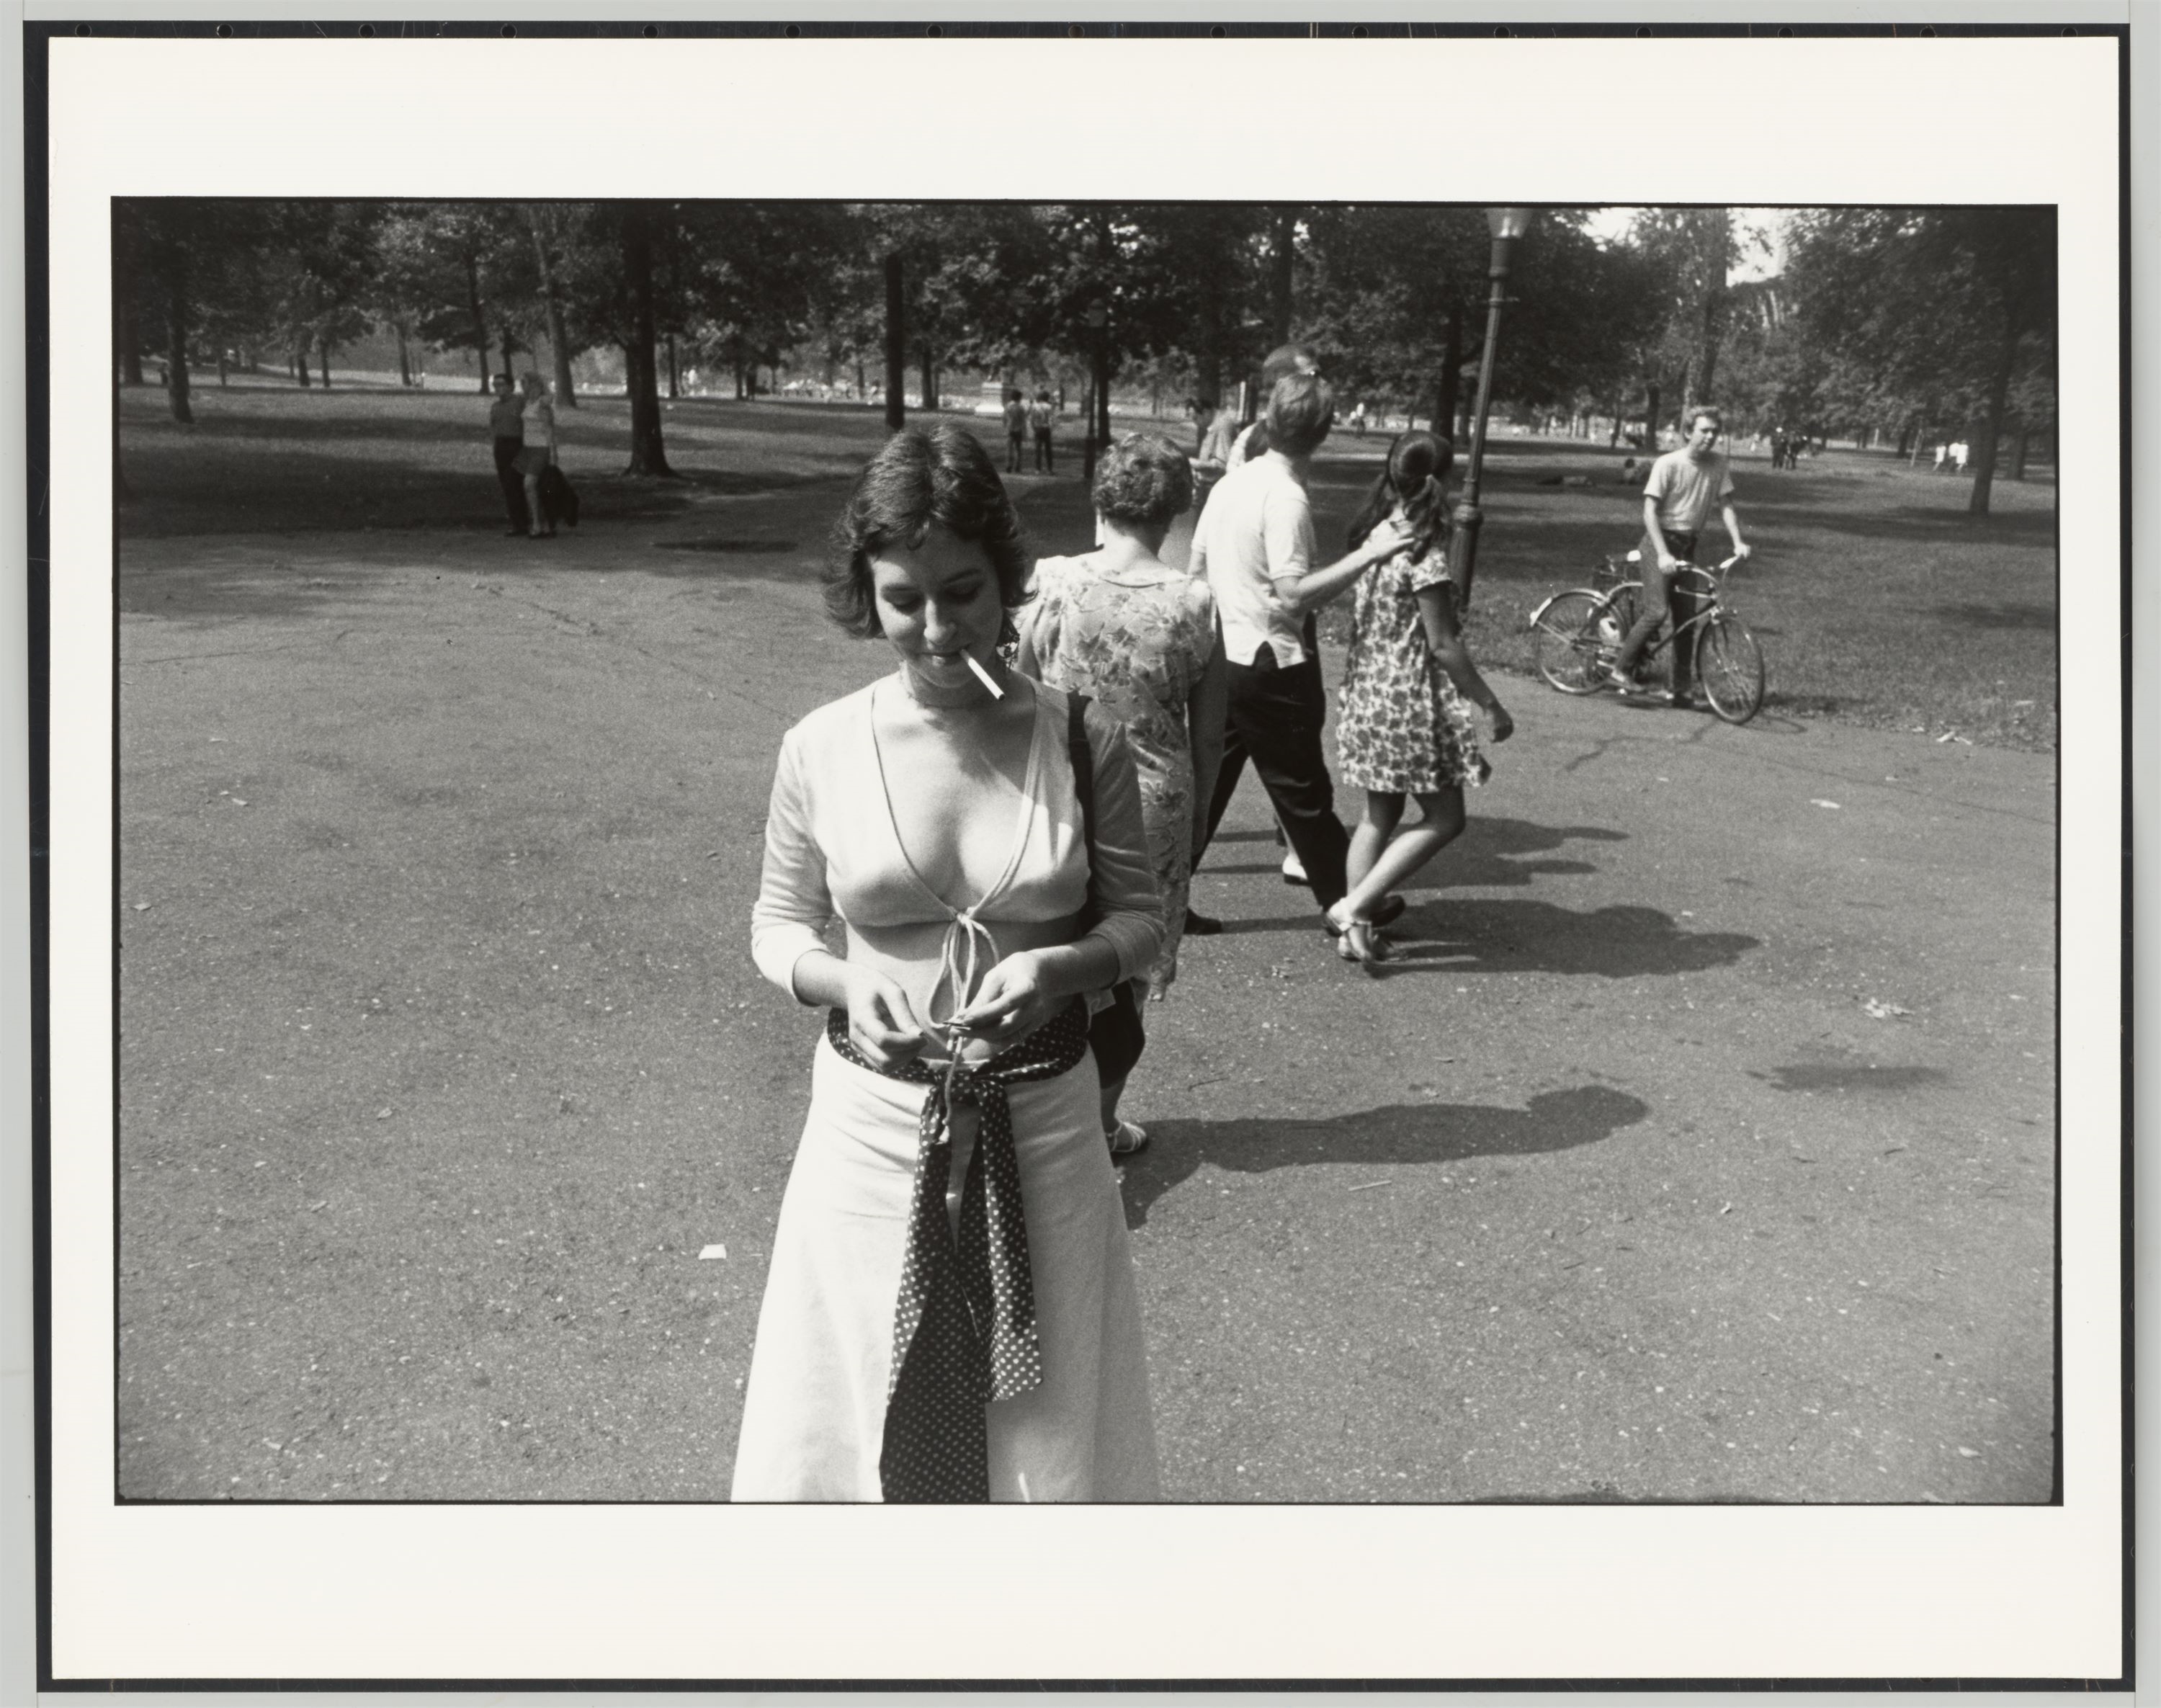 Artwork by Garry Winogrand, From the series "Women are Beautiful”, 1960–1975., Made of prints